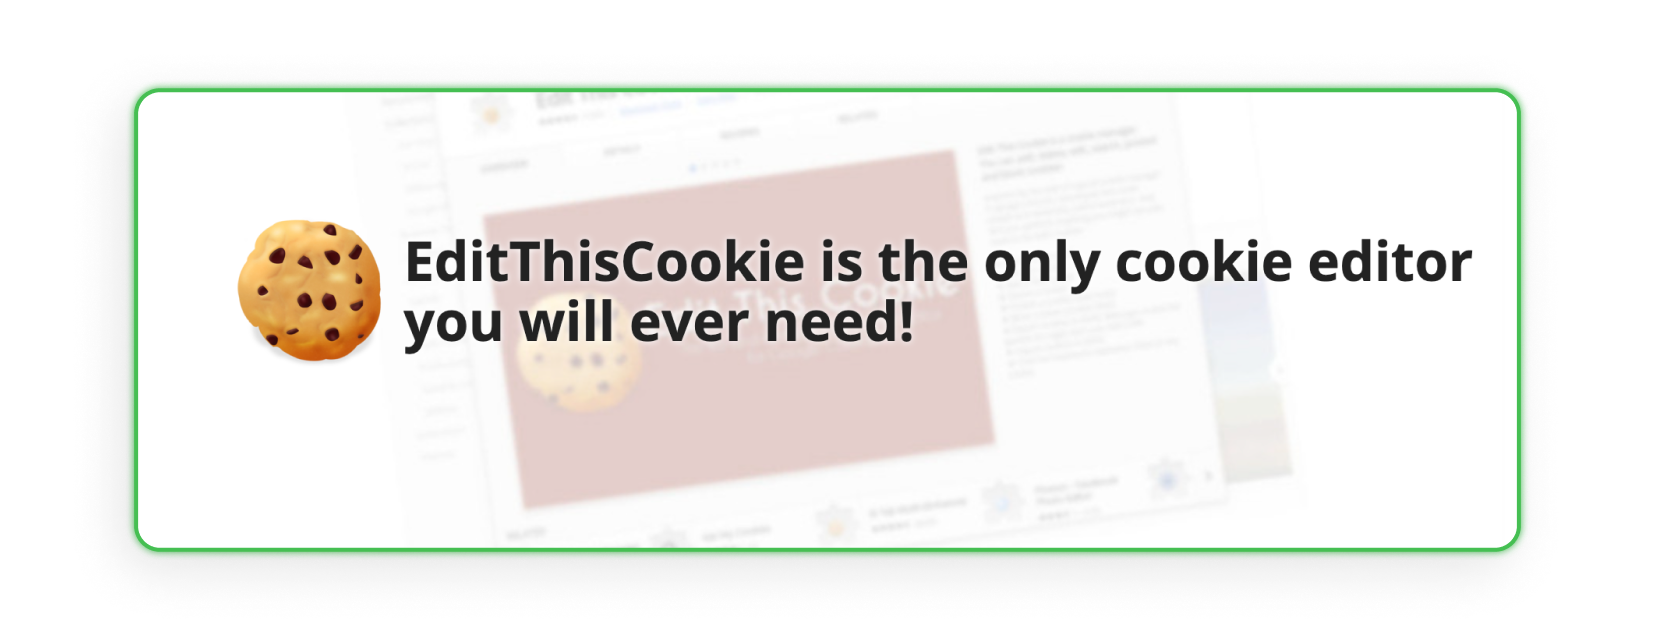 Chrome extension for publishers - EditThisCookie